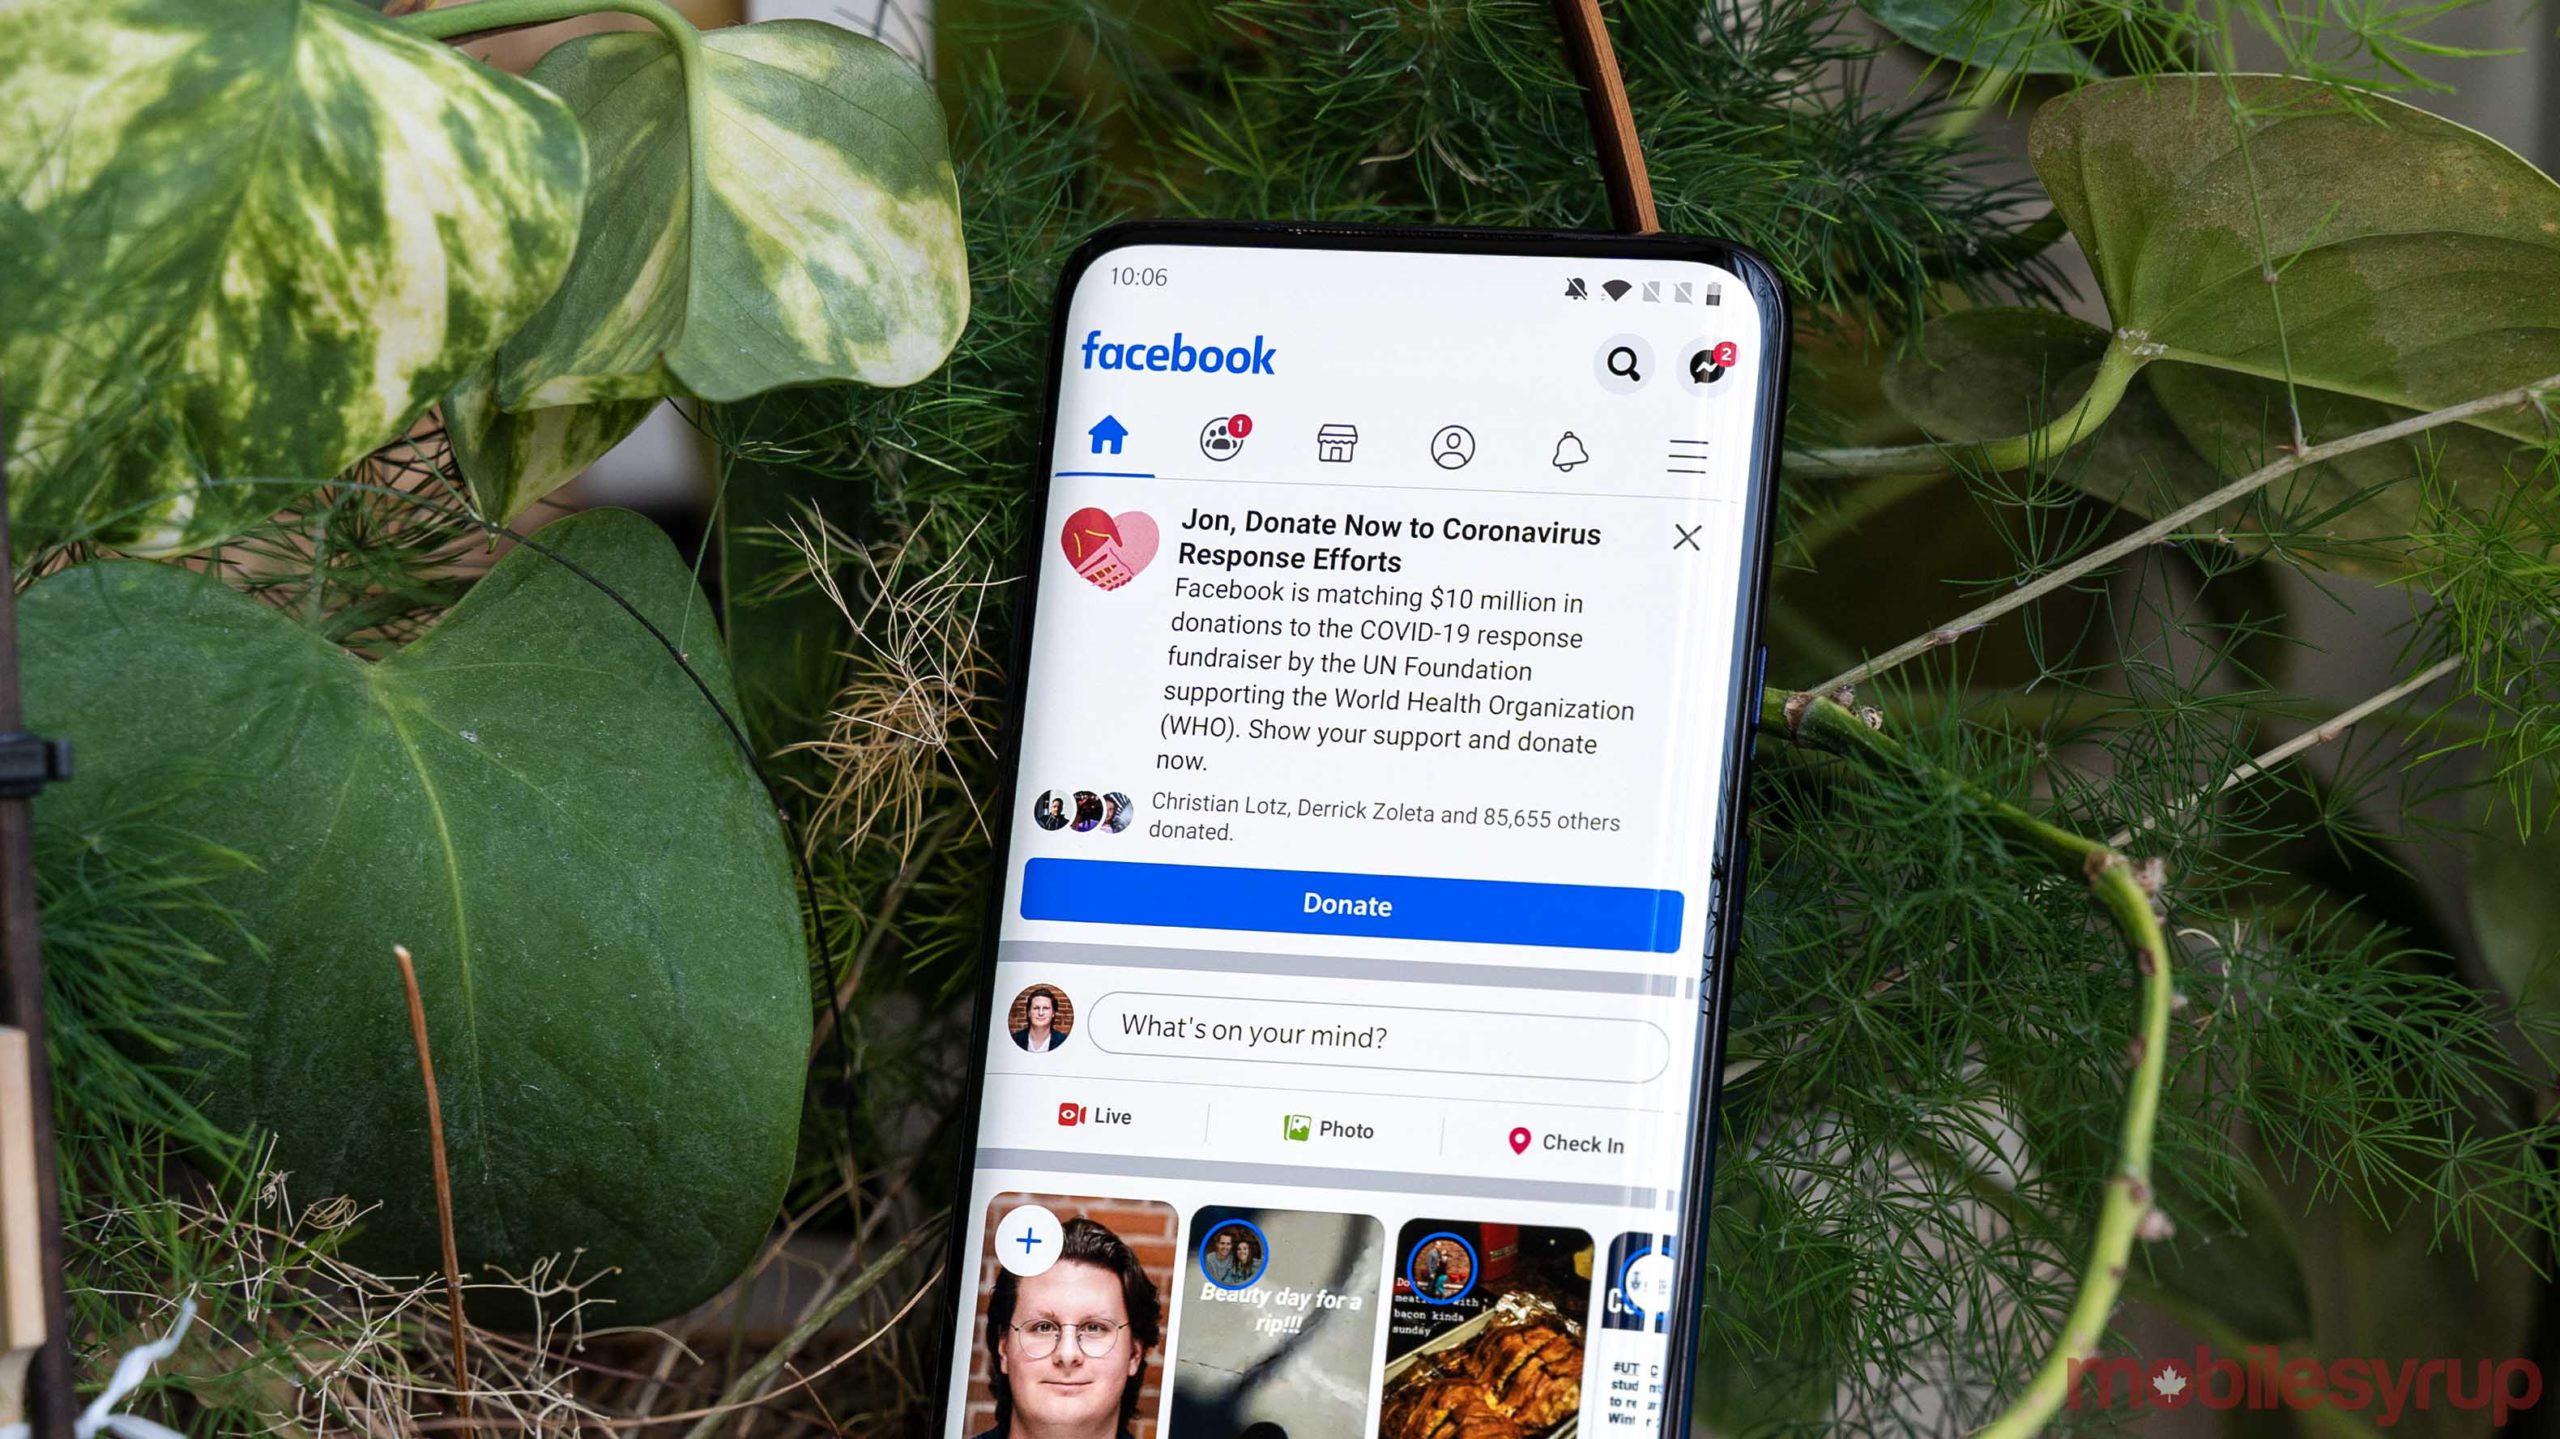 Facebook app on Android